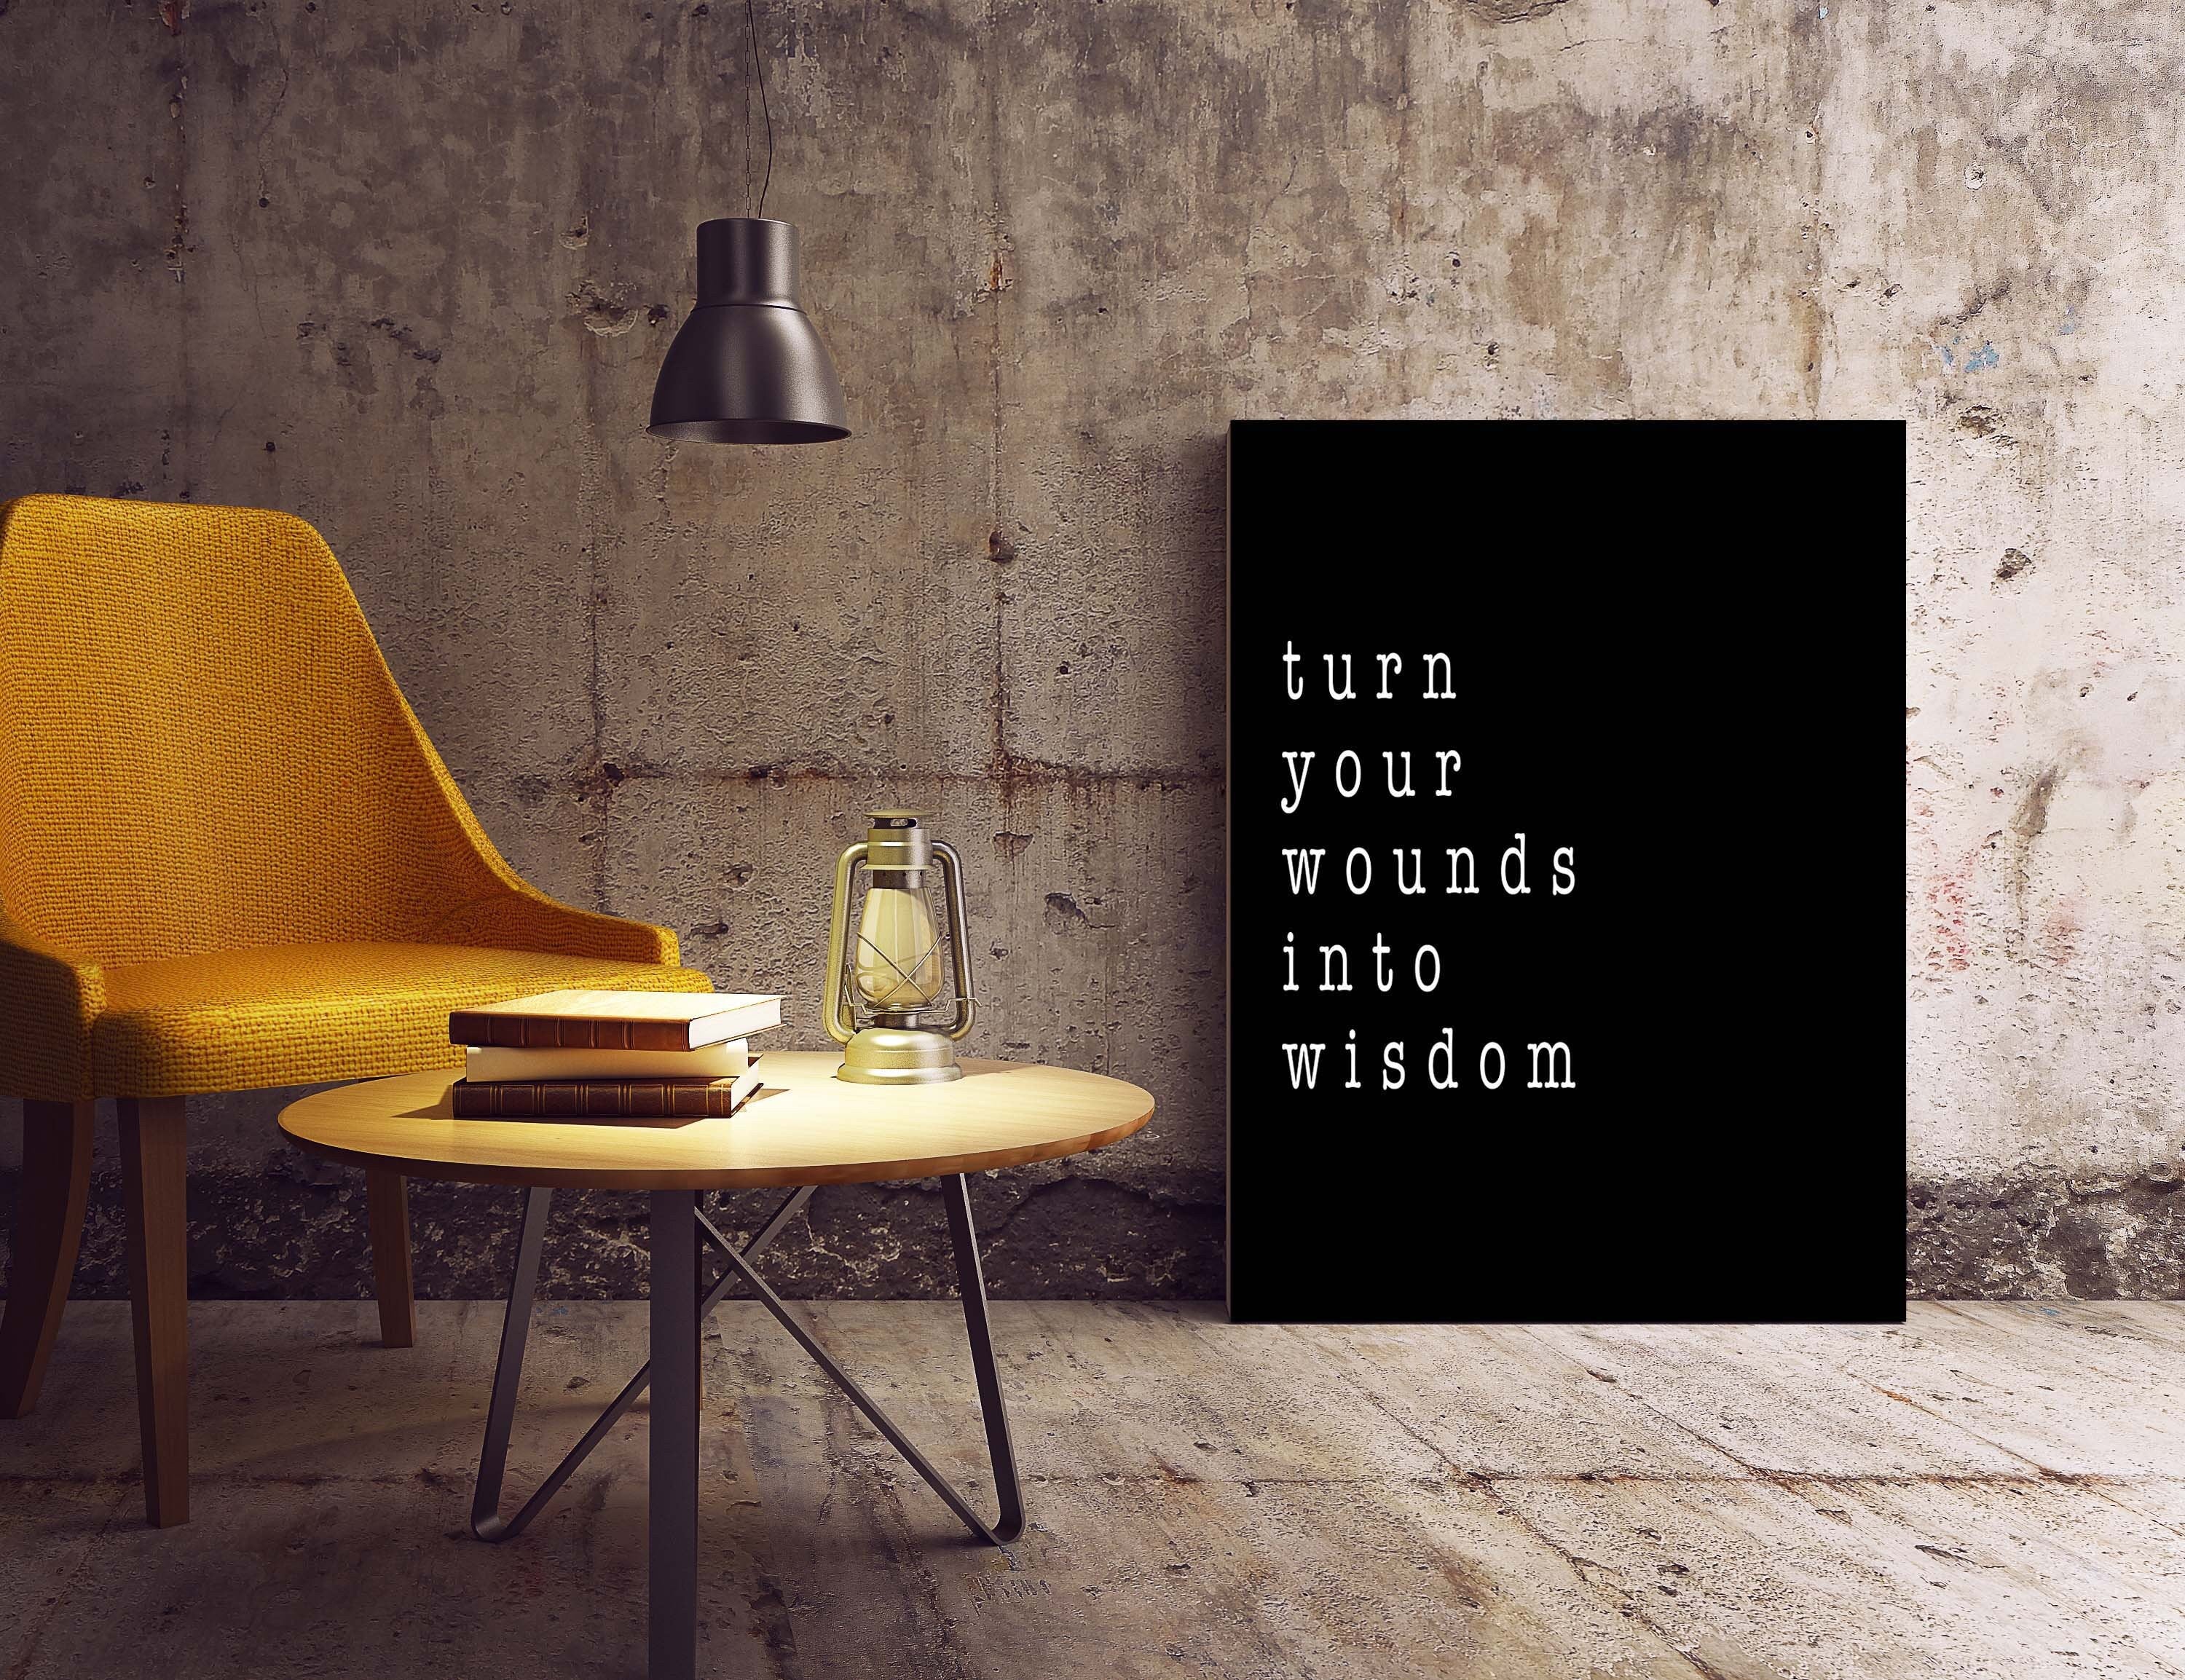 Turn Your Wounds Into Wisdom Inspirational Quote Print, Motivational Minimalist Art in Black & White